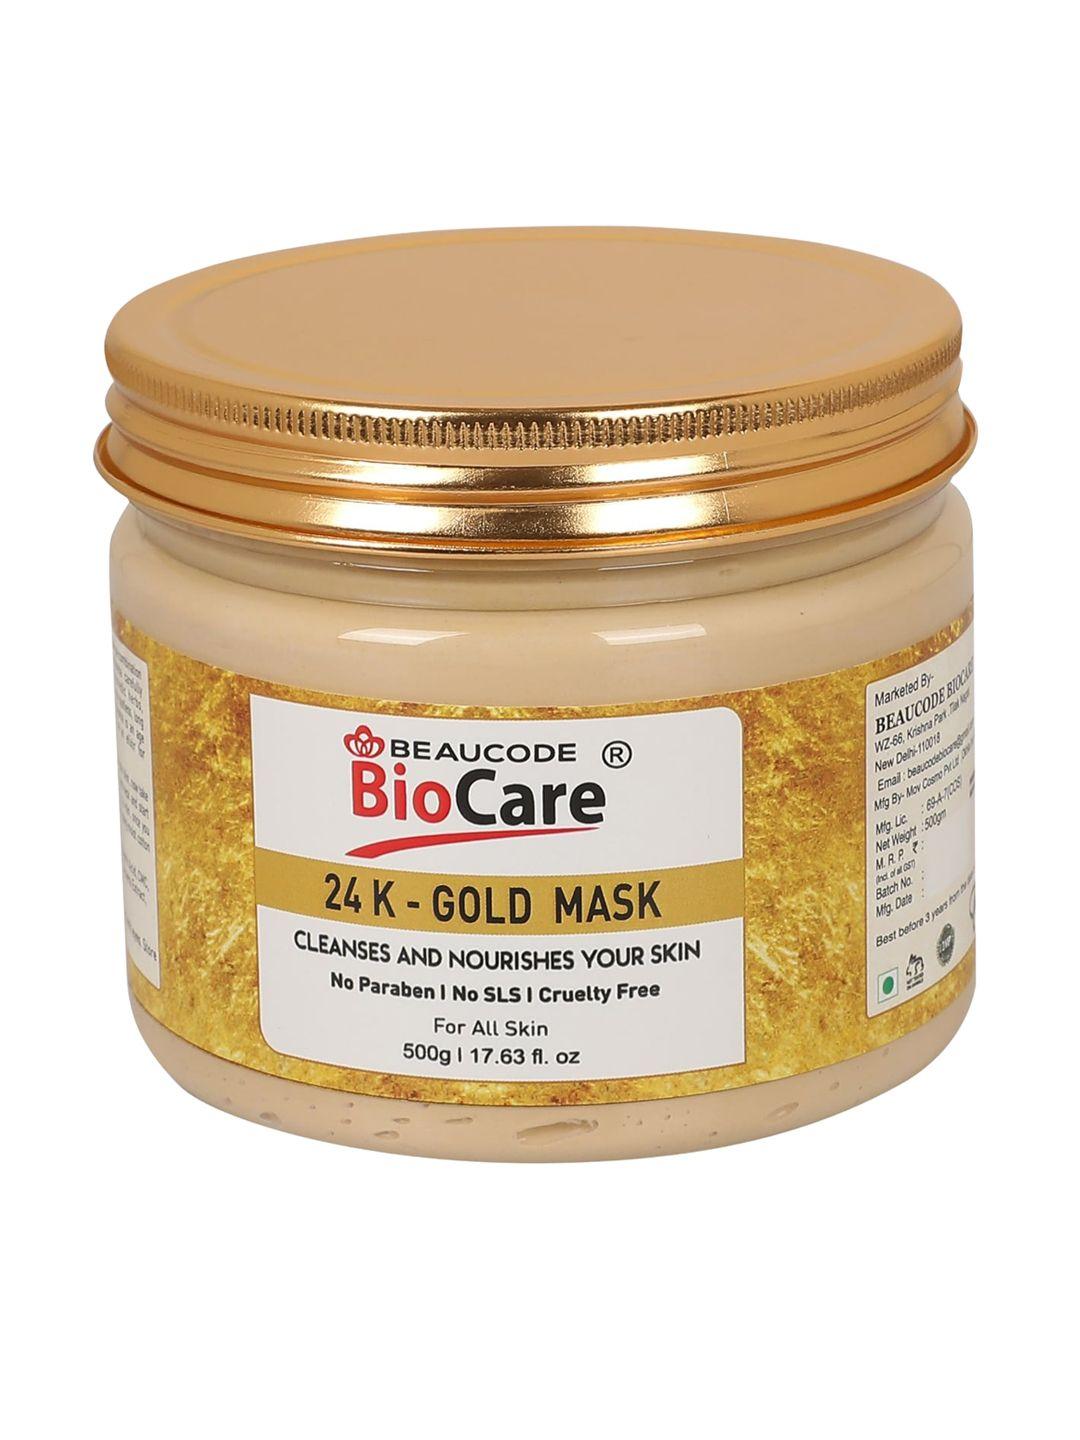 beaucode biocare 24k-gold face and body mask for skin nourishing & cleansing - 500 g